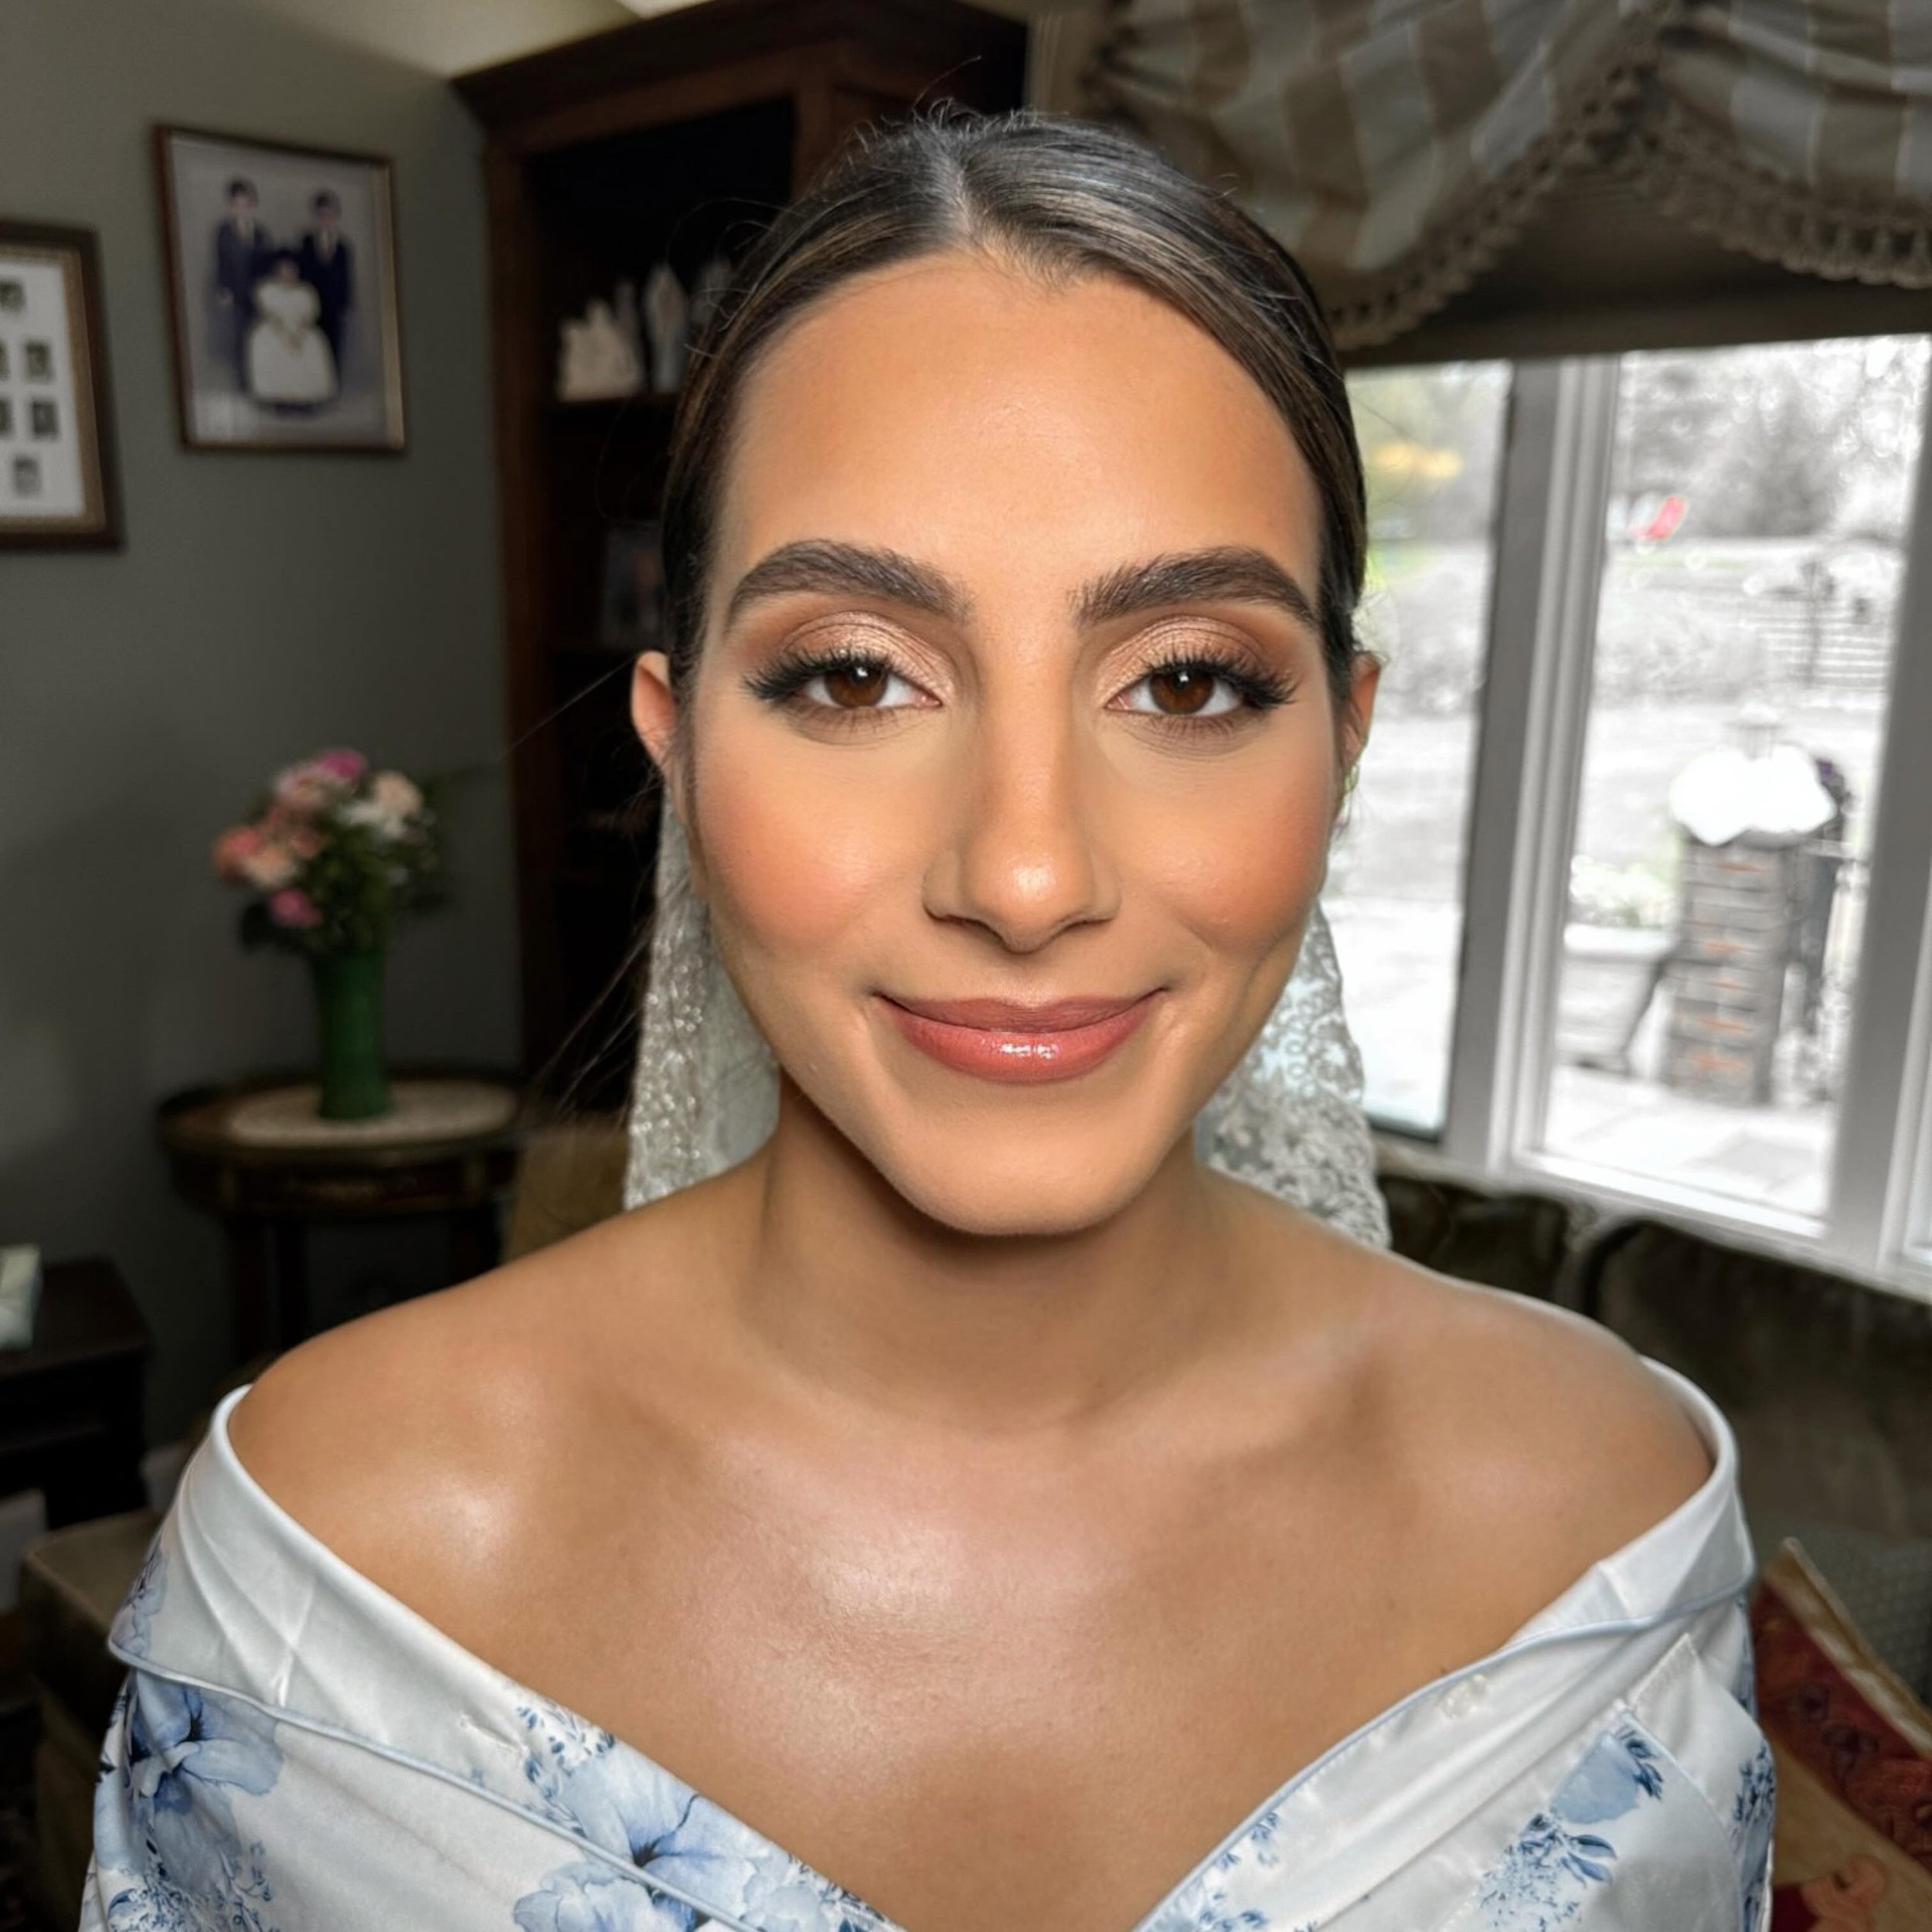 I'm absolutely loving this trend of angelic bridal makeup! structured brows, sultry eyes, and glowing skin.. ✨chefs kiss✨

🤍 brides to be&ndash; save this for your wedding day inspo! 

#bridalmakeup #bridetobe #bostonmakeupartist #newportmakeupartis